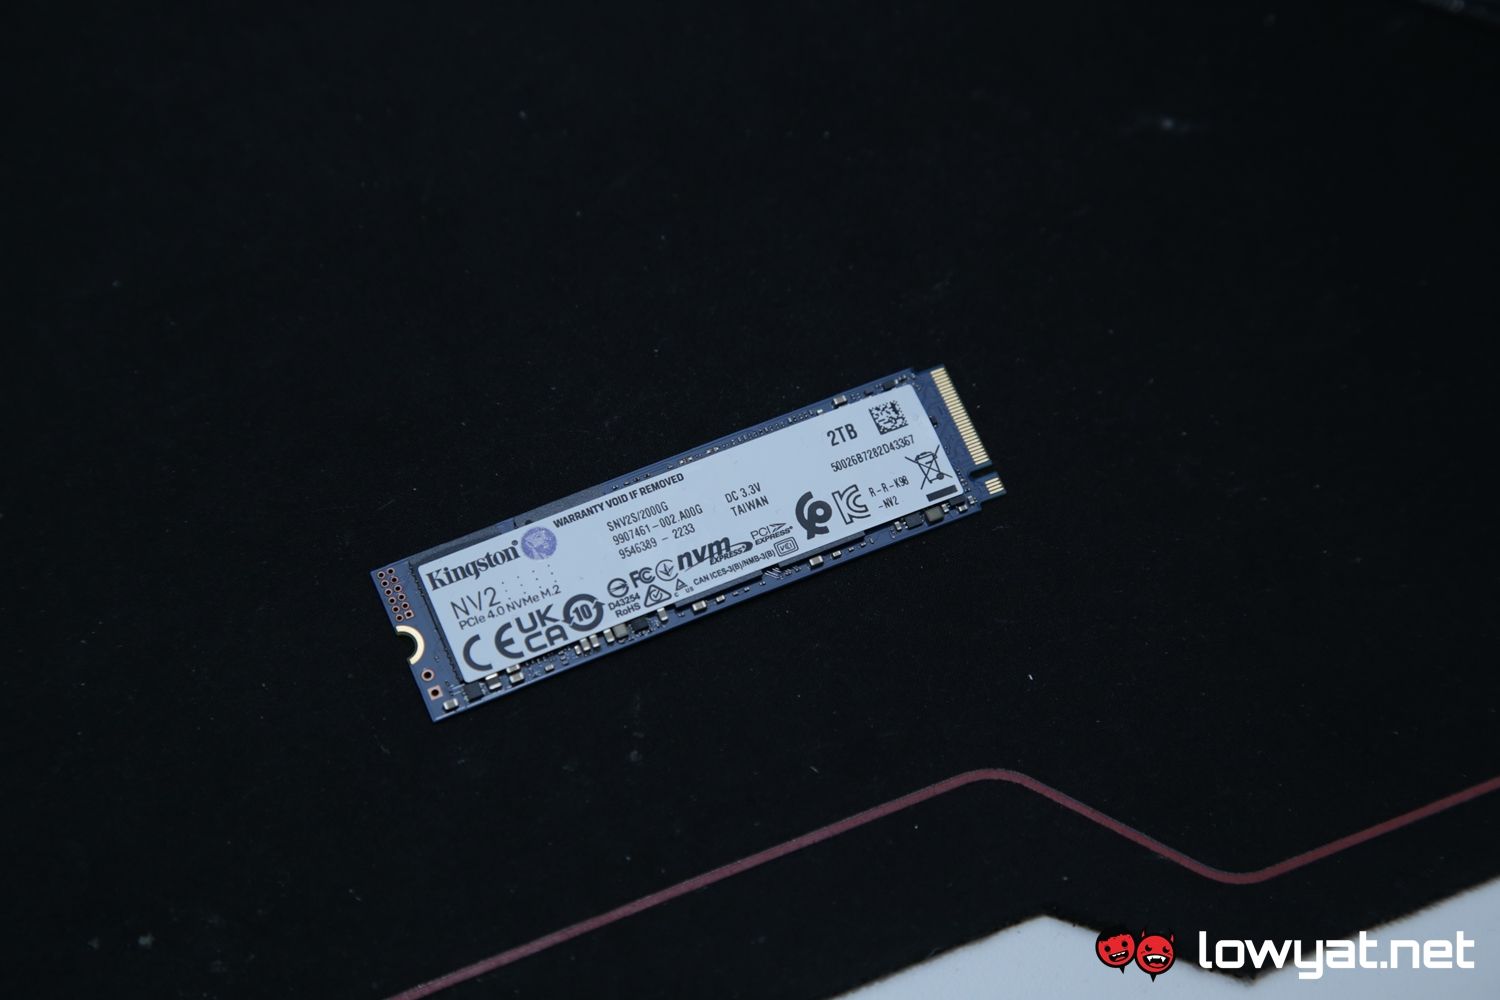 Kingston NV2 review - Good SSD for a very good price